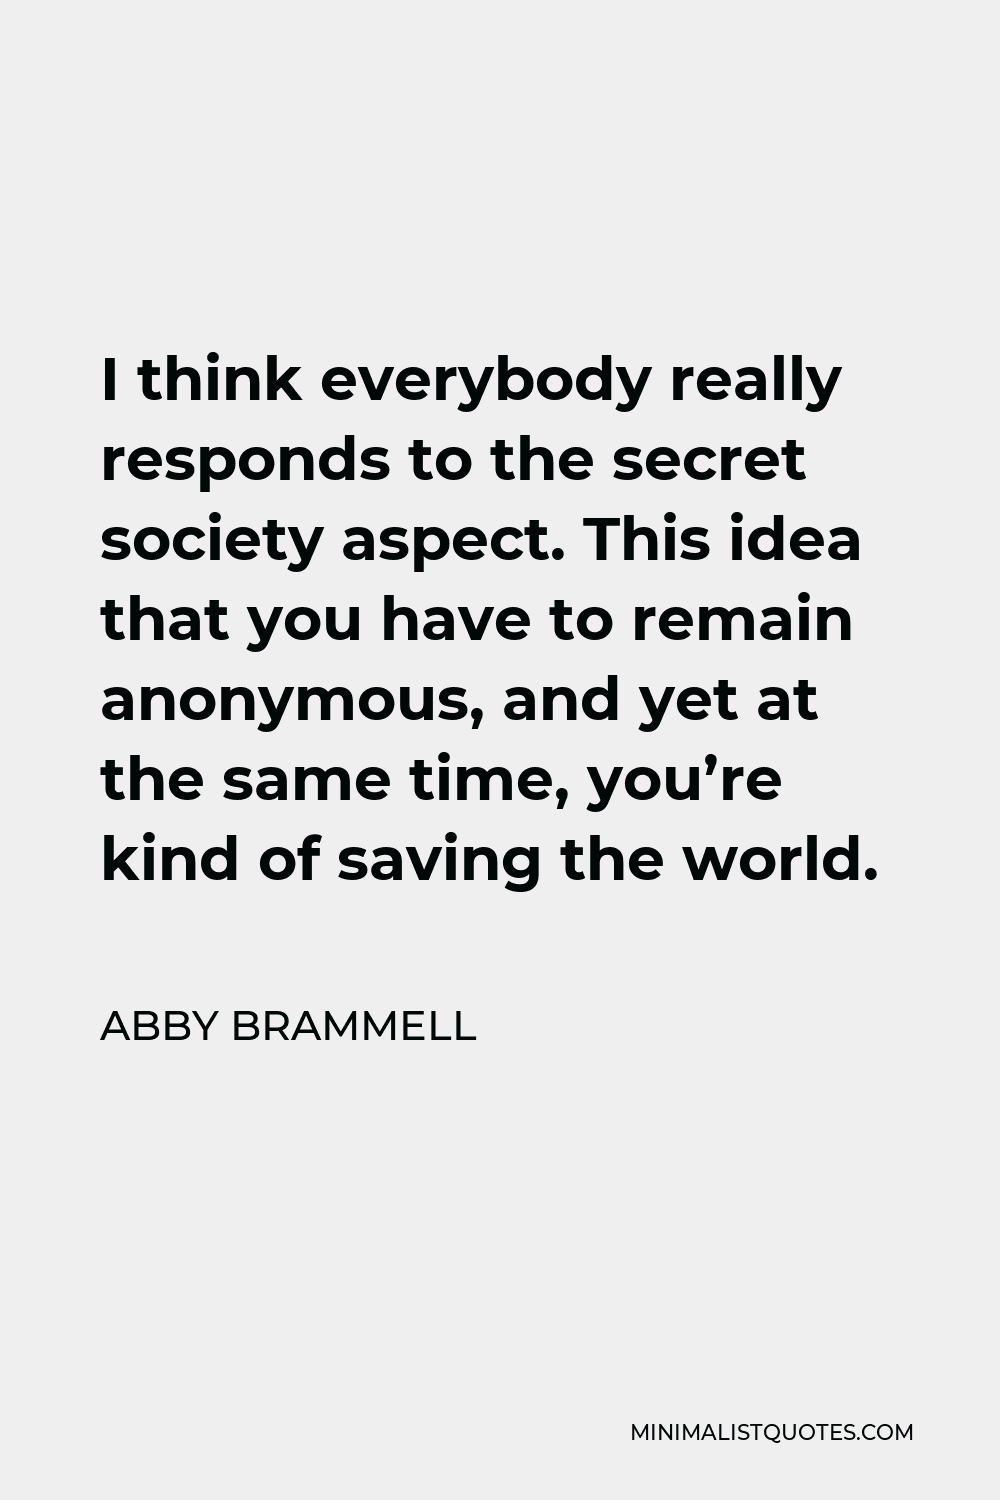 Abby Brammell Quote - I think everybody really responds to the secret society aspect. This idea that you have to remain anonymous, and yet at the same time, you’re kind of saving the world.